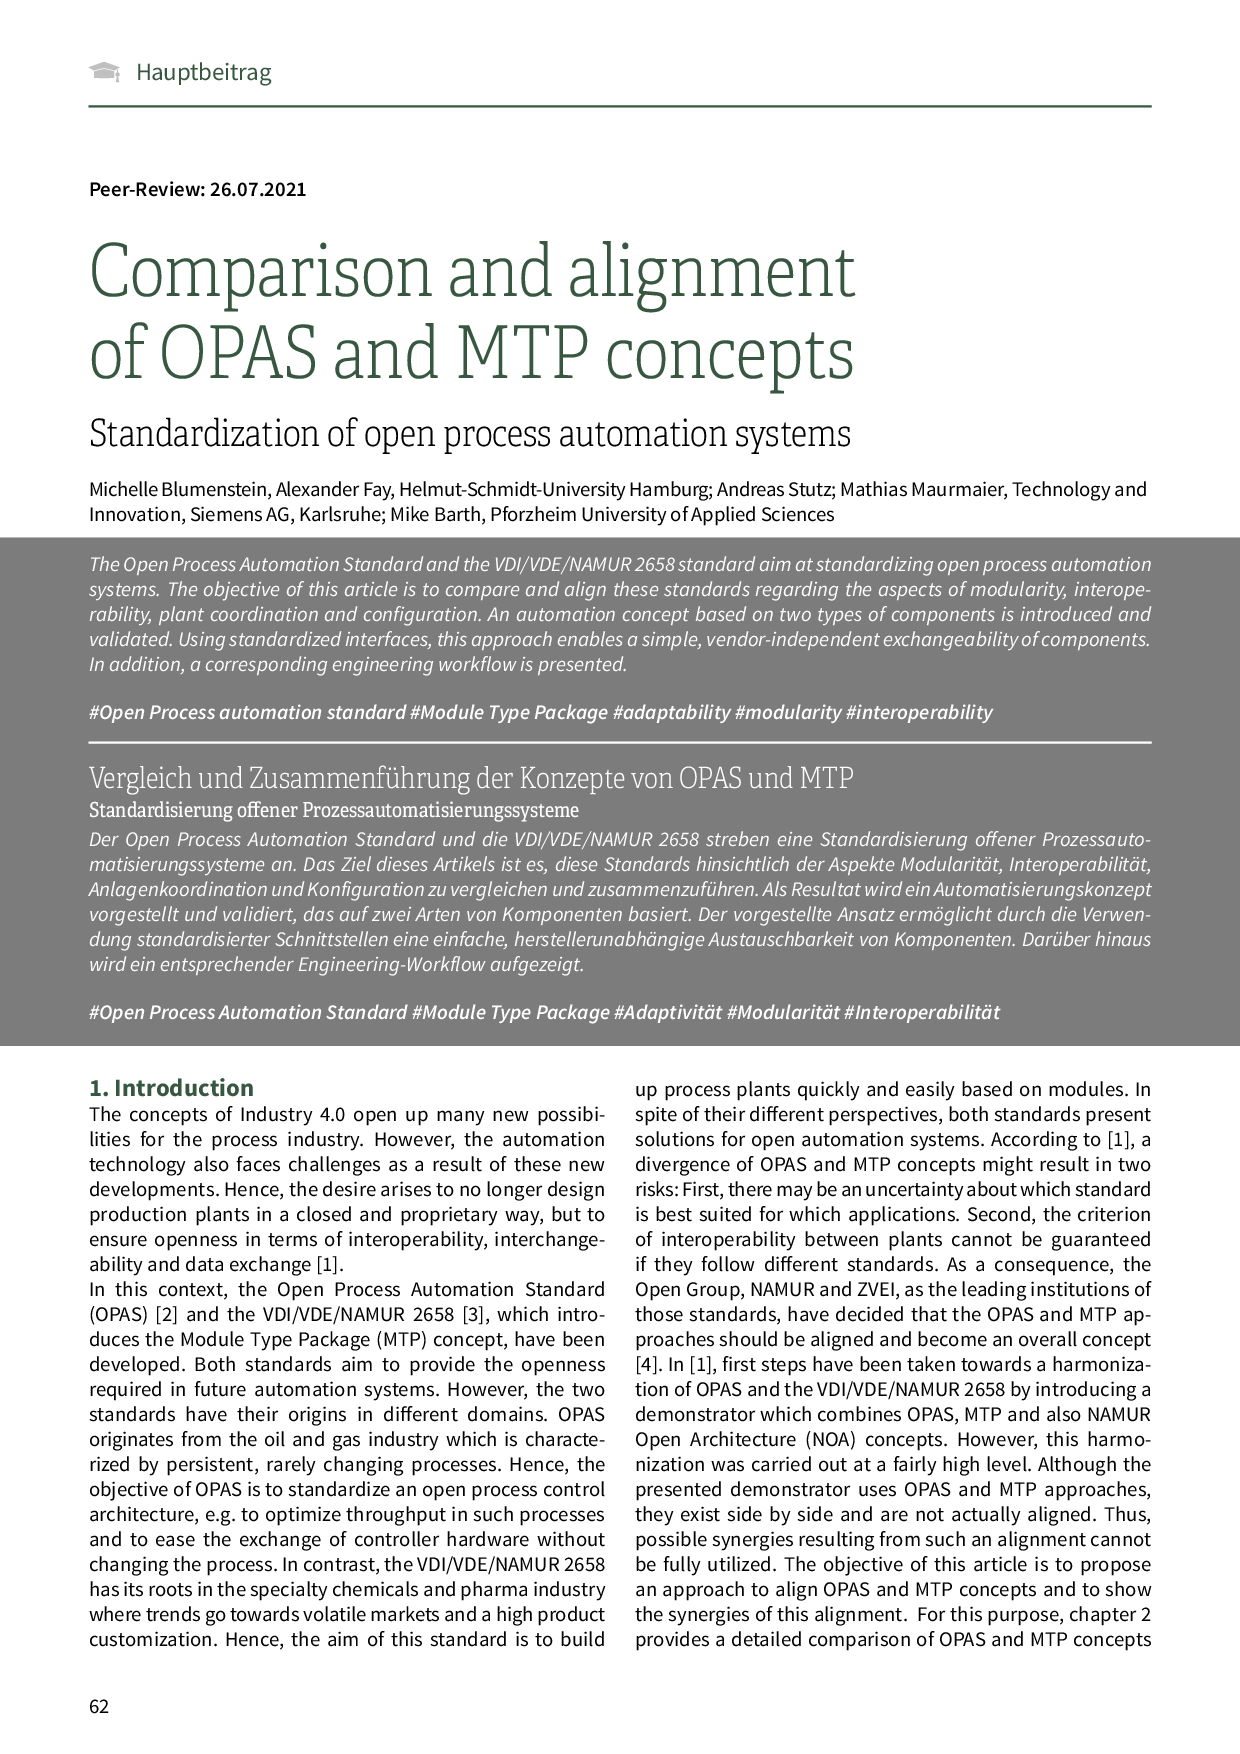 Comparison and alignment of OPAS and MTP concepts